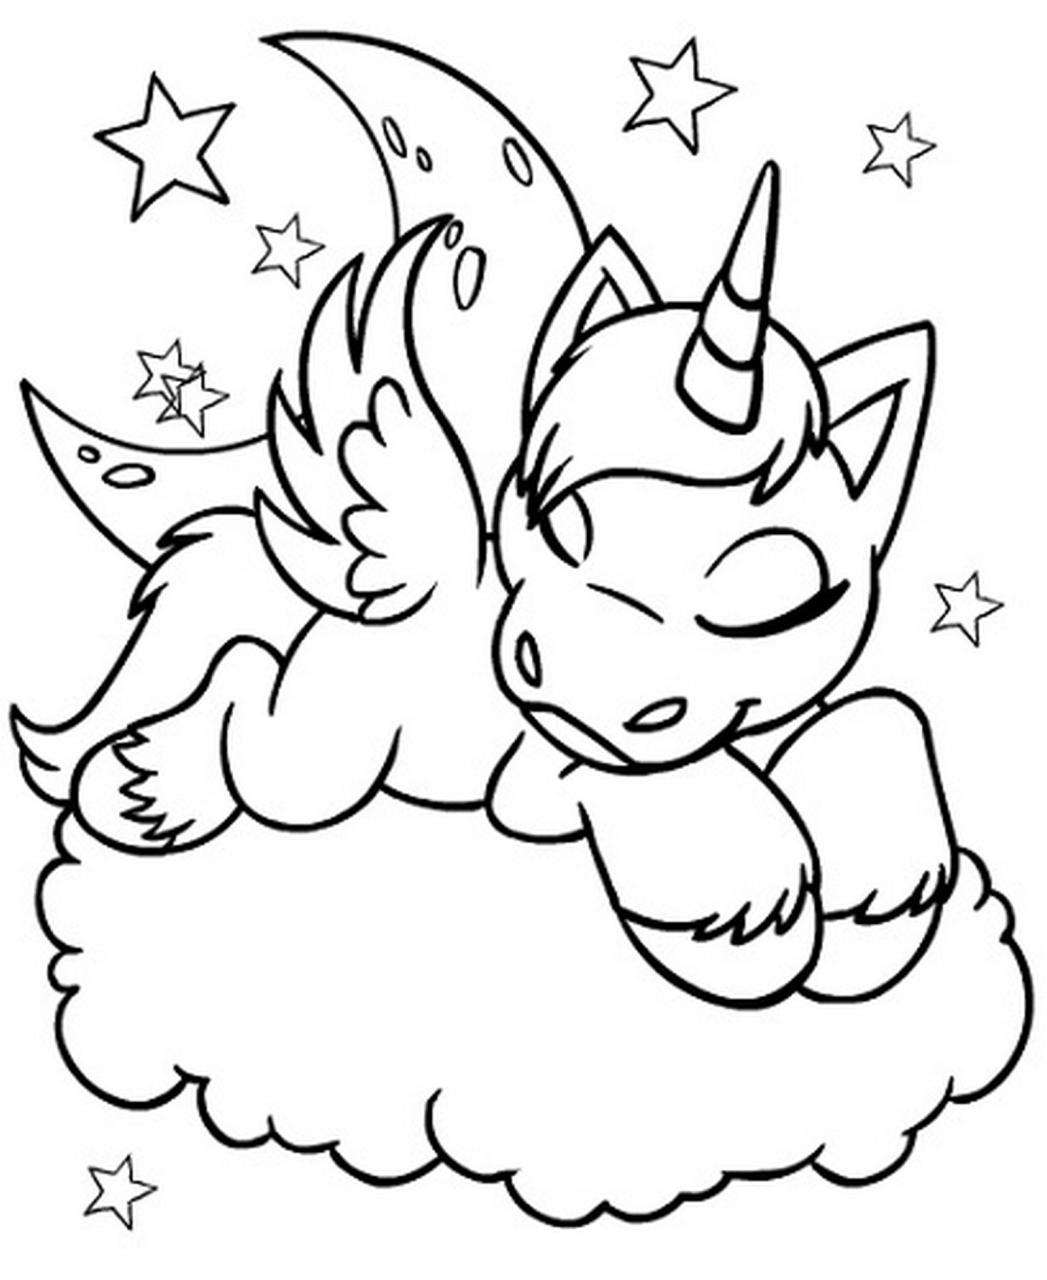 Unicorn Coloring Pages Online